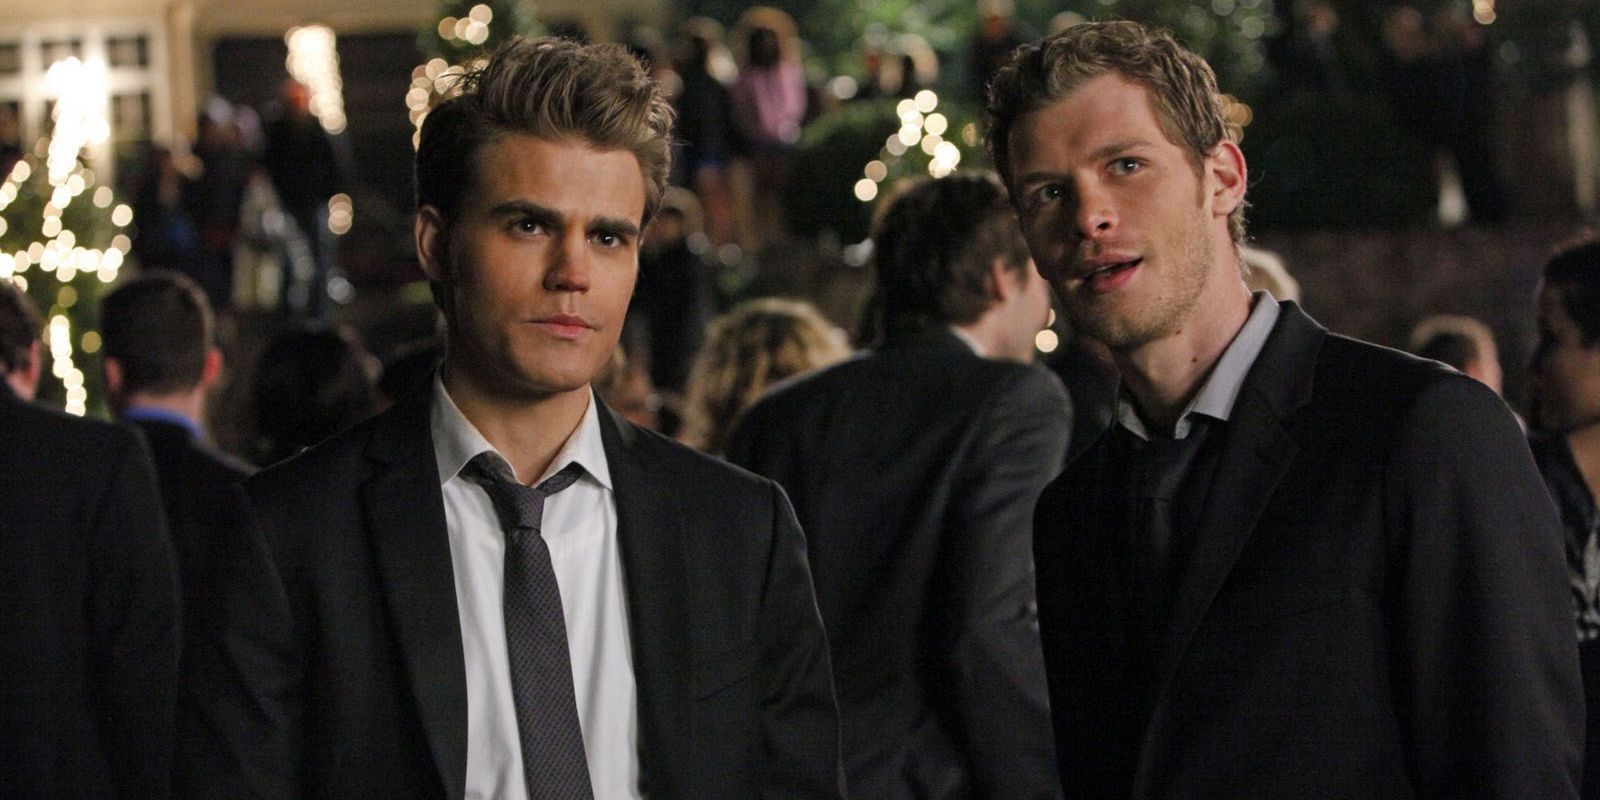 Stefan and Klaus at Homecoming in The Vampire Diaries.